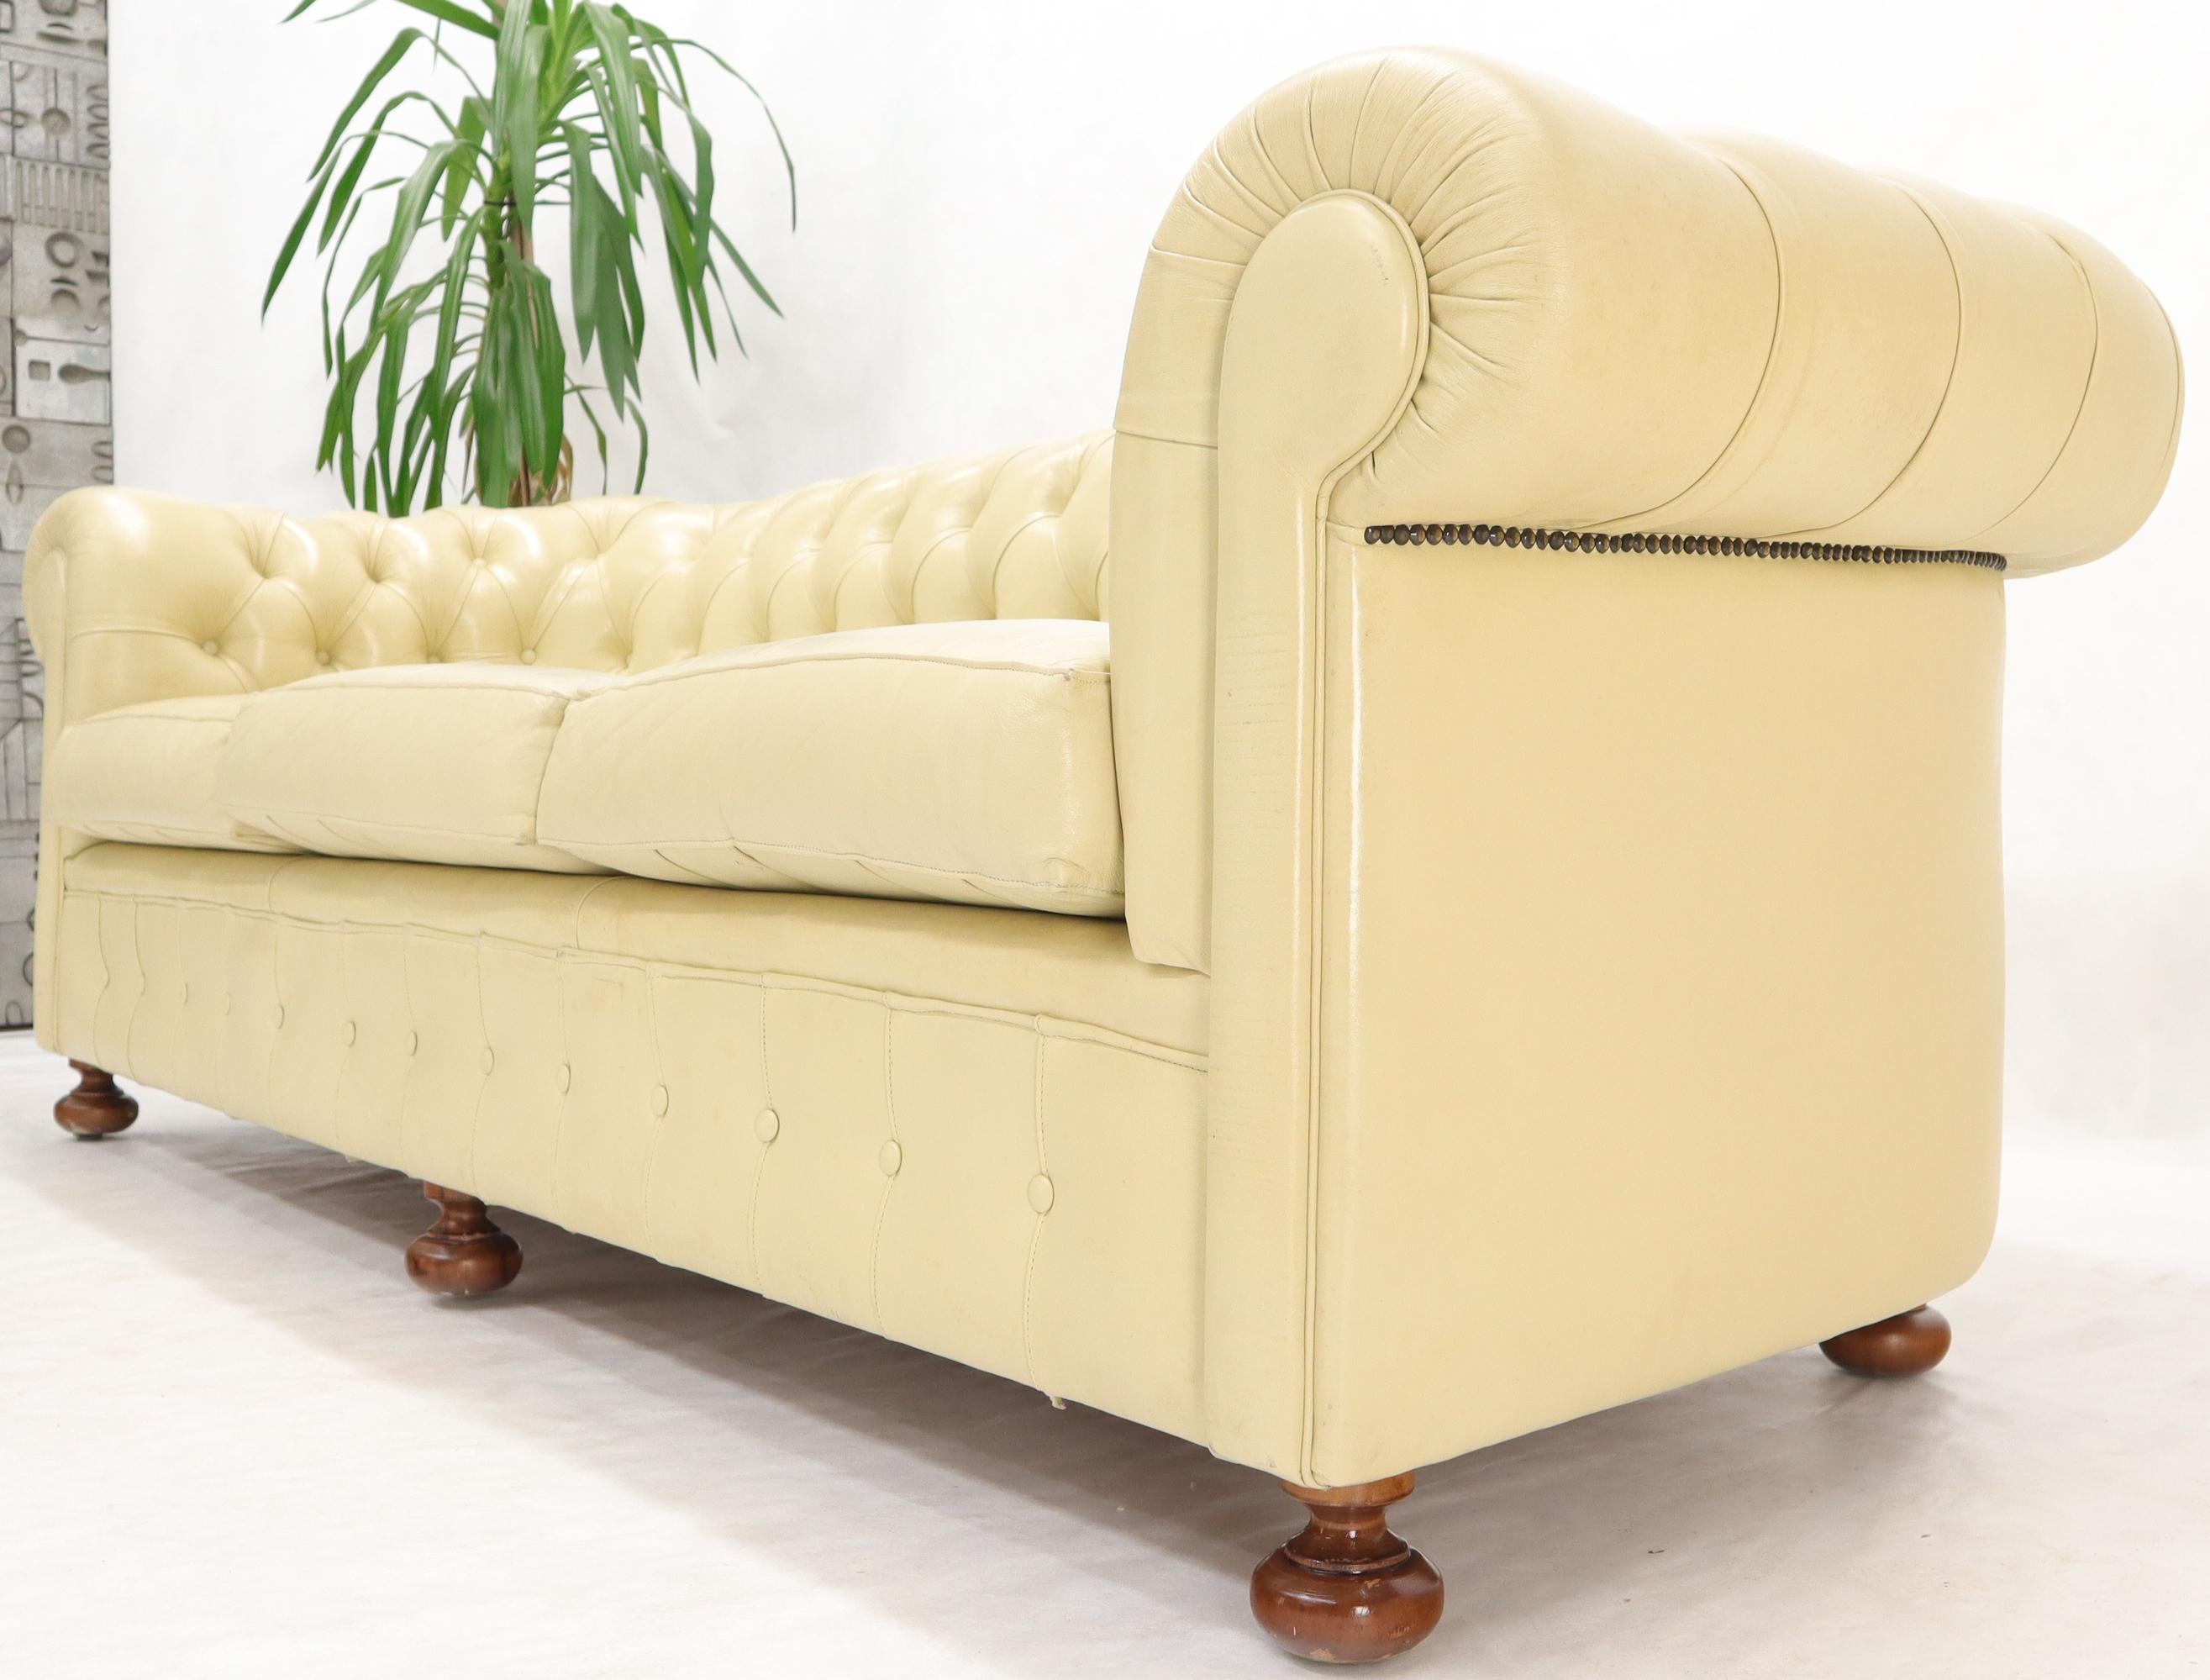 20th Century Cream Tufted Leather Chesterfield Sofa